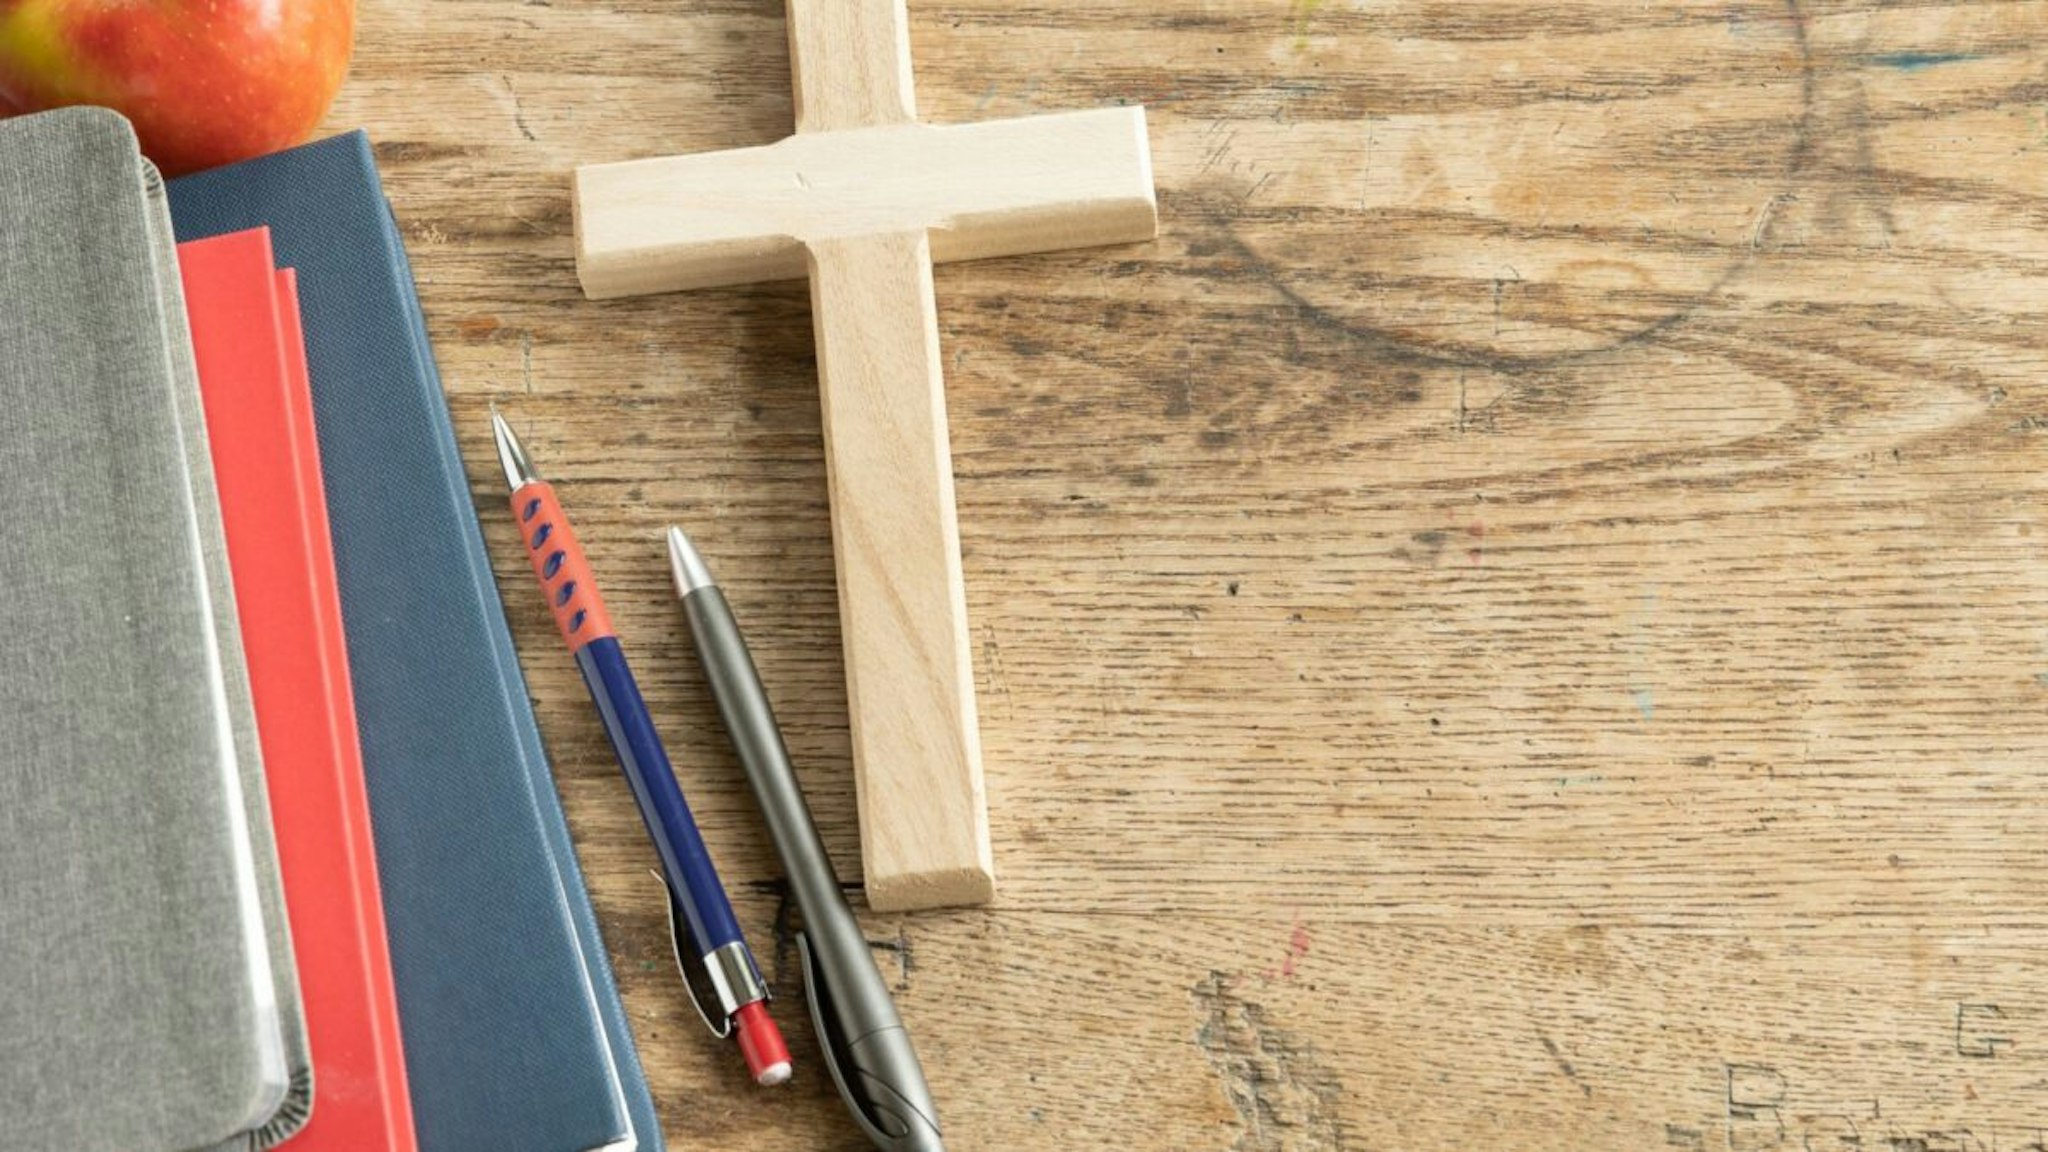 Wood Christian cross laying on a vintage wood desk with a stack of grey, red and navy blue books, a red apple and a pen and pencil, shot from above with copy space